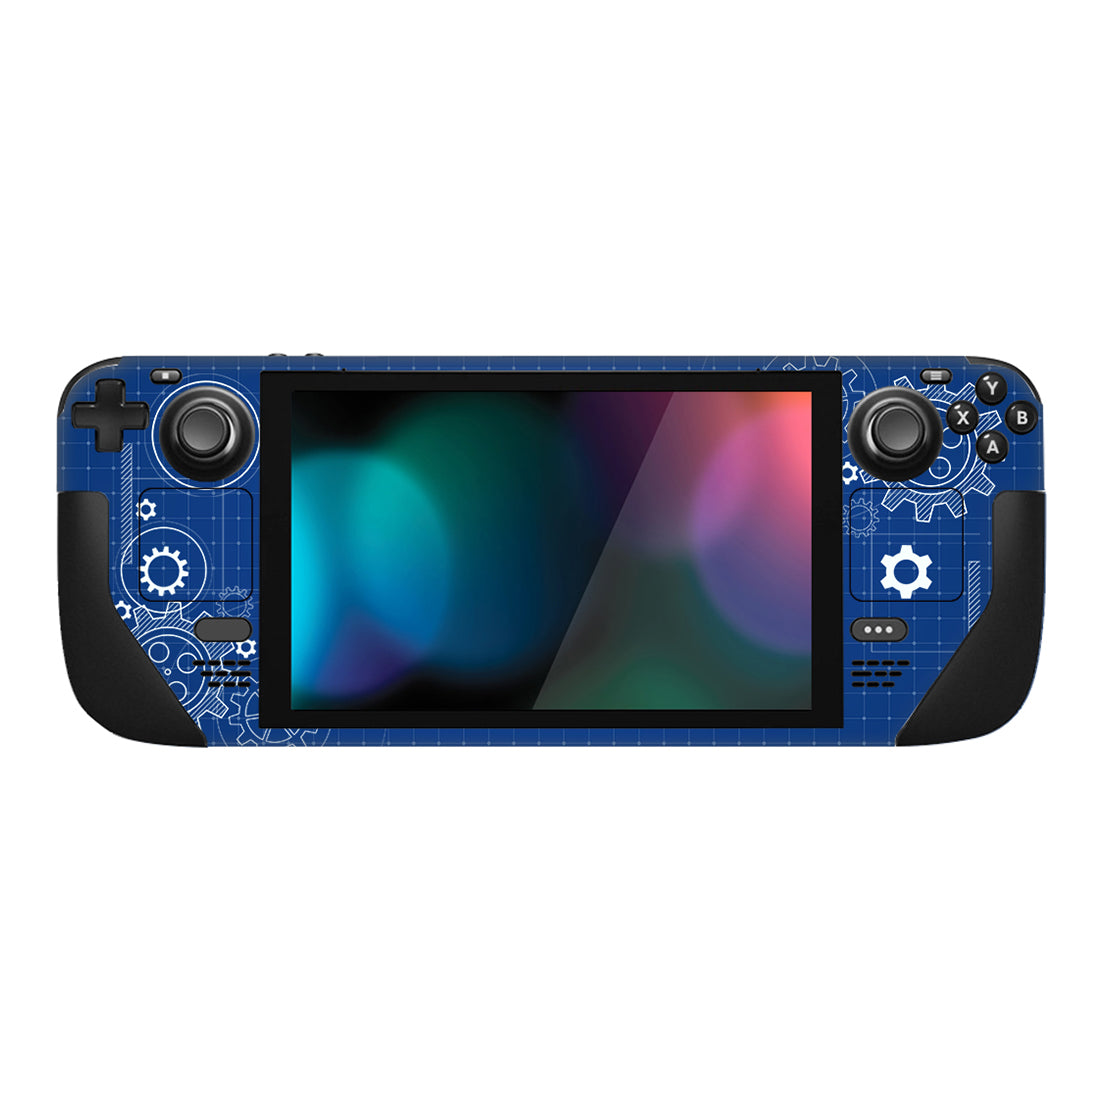 PlayVital Full Set Protective Skin Decal for Steam Deck, Custom Stickers Vinyl Cover for Steam Deck Handheld Gaming PC - Dynamic Sketch Blue - SDTM017 playvital